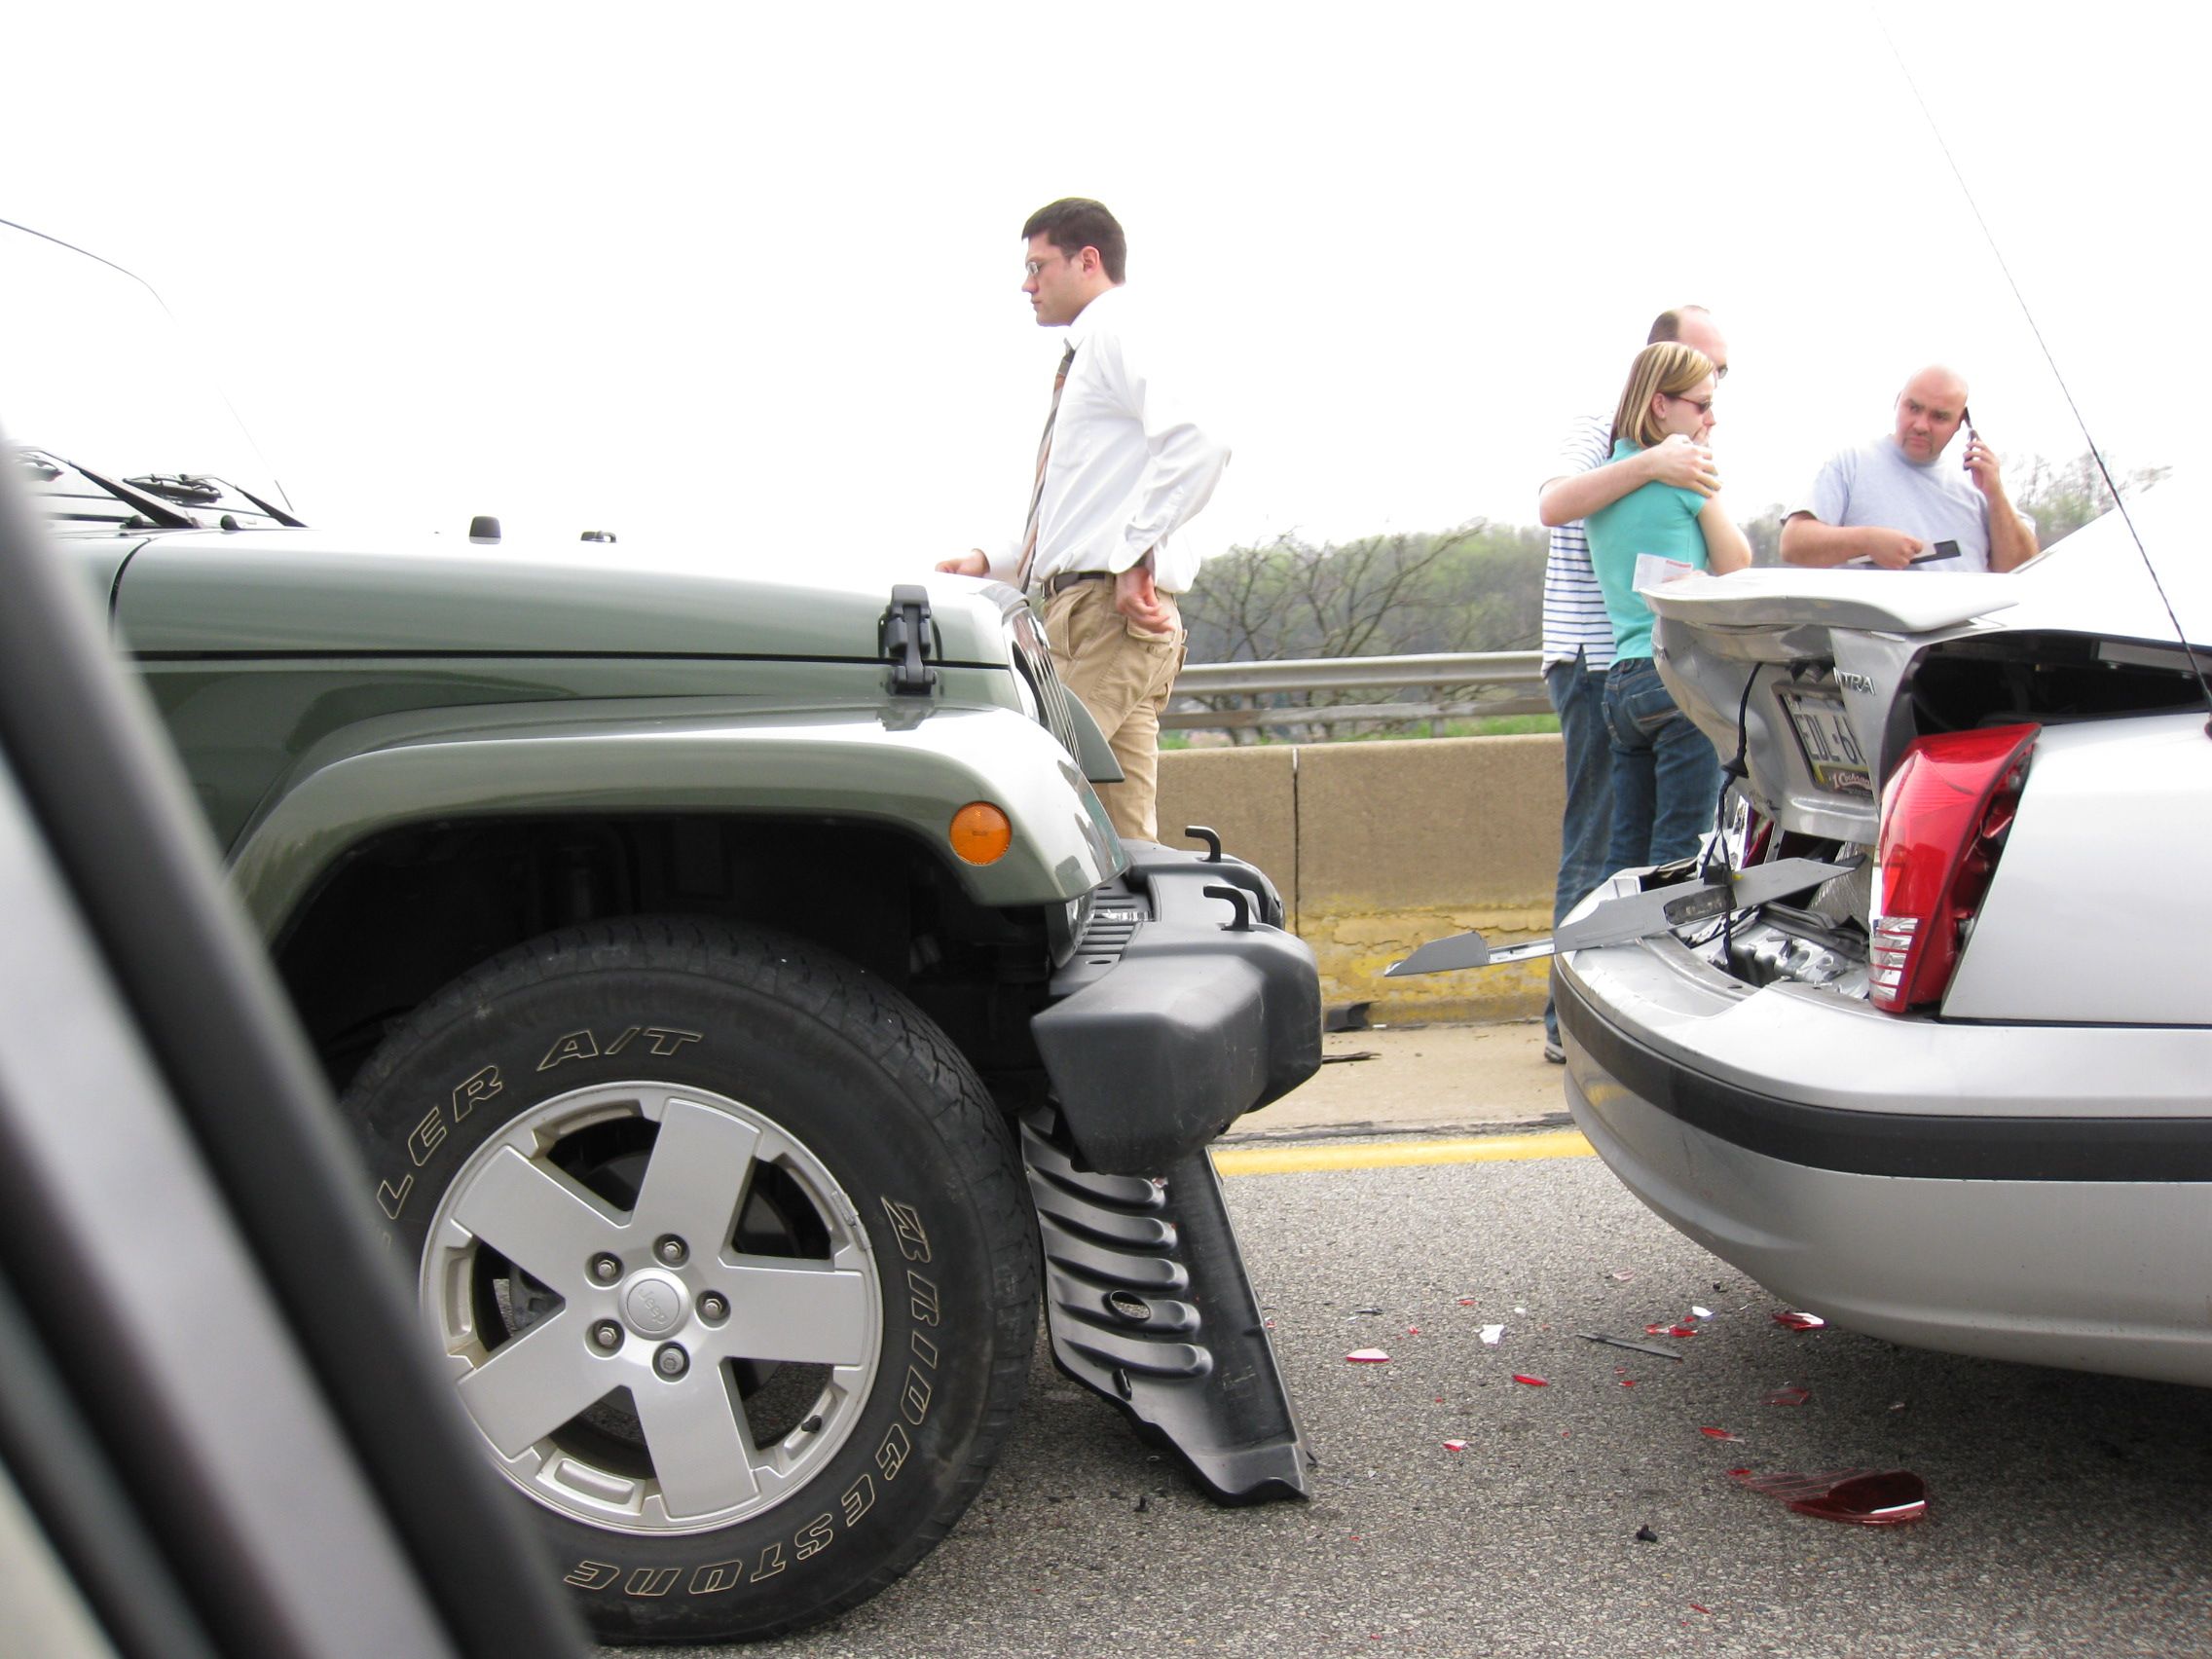 Two motorists in an accident